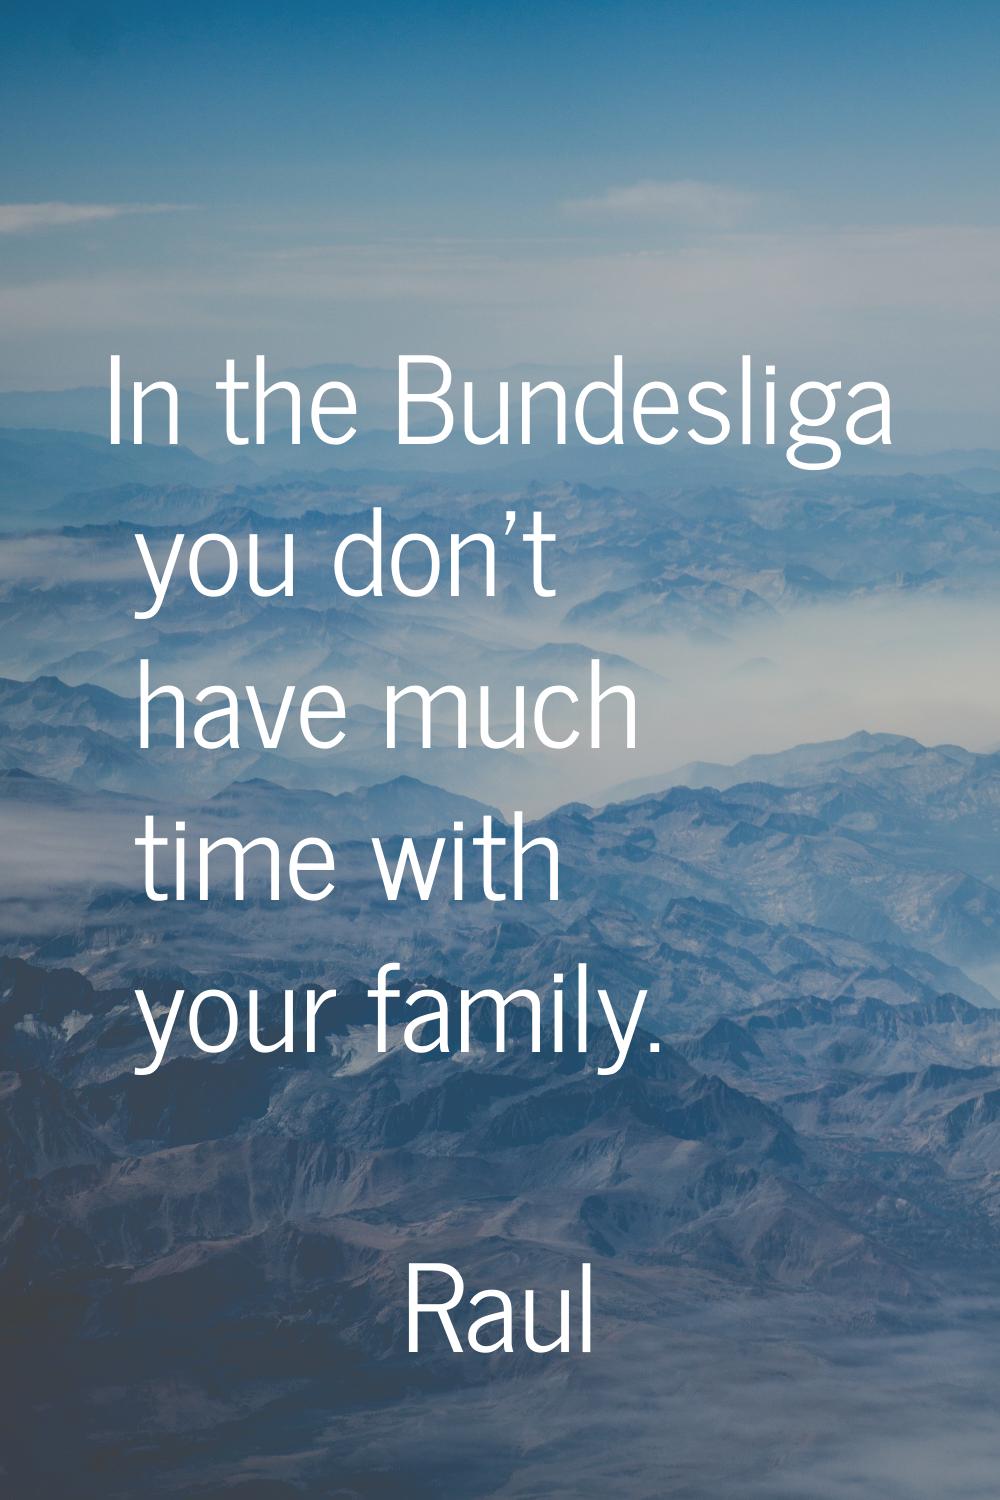 In the Bundesliga you don't have much time with your family.